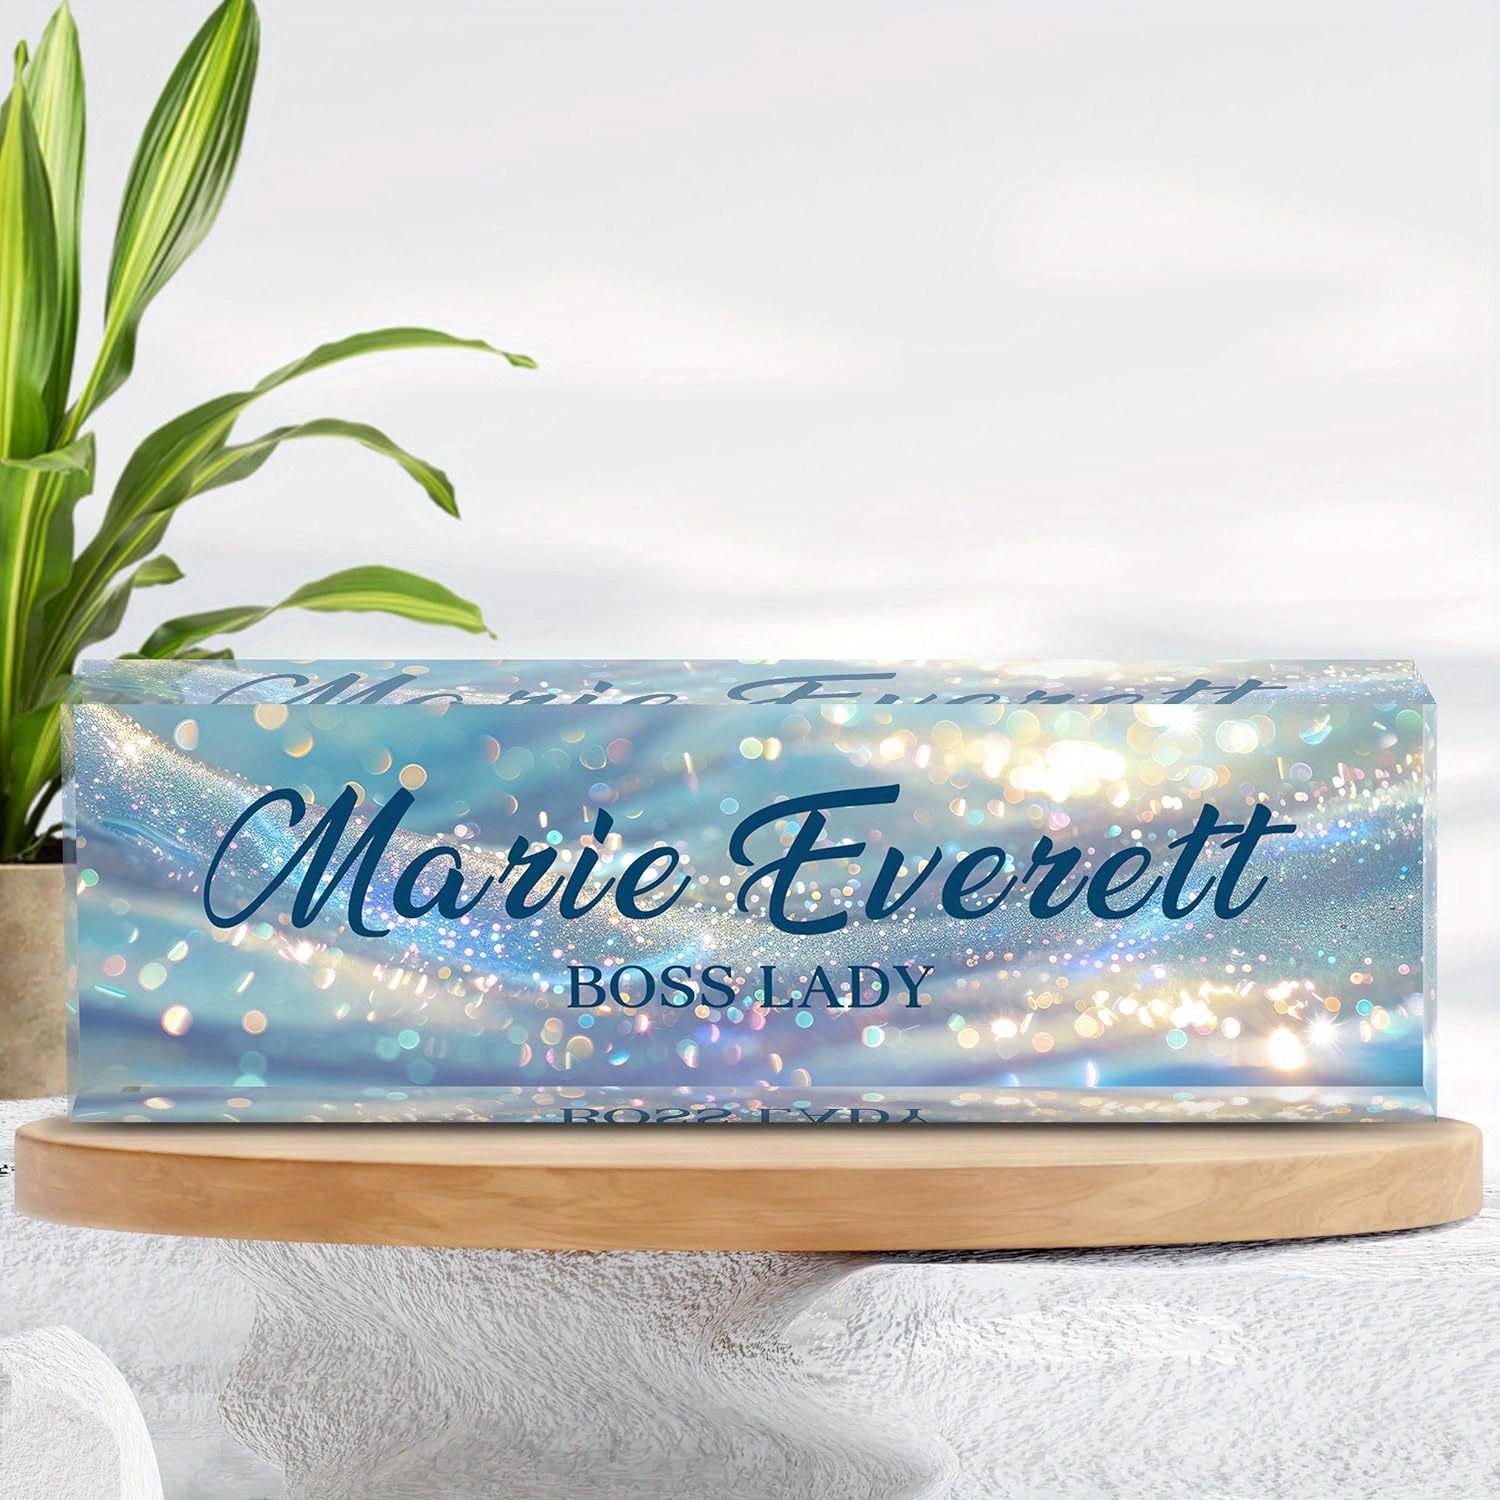 

Personalized Acrylic Desk Name Plate, Tabletop Custom Plaque With Design, Multifunctional Office Decor Gift For Women, Boss, Employee, Teacher - English Text Engraving